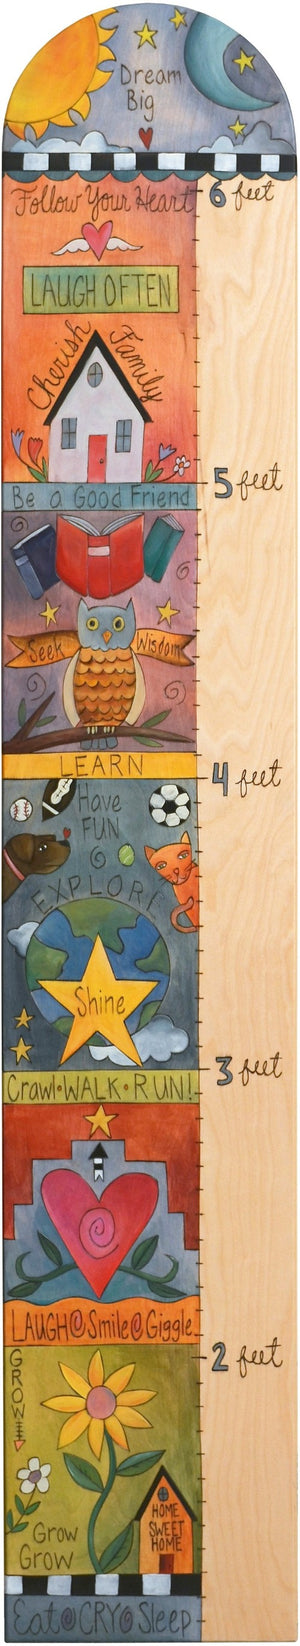 Everlasting Growth Chart –  Colorful growth chart with inspirational scenes and sun and moon at the top